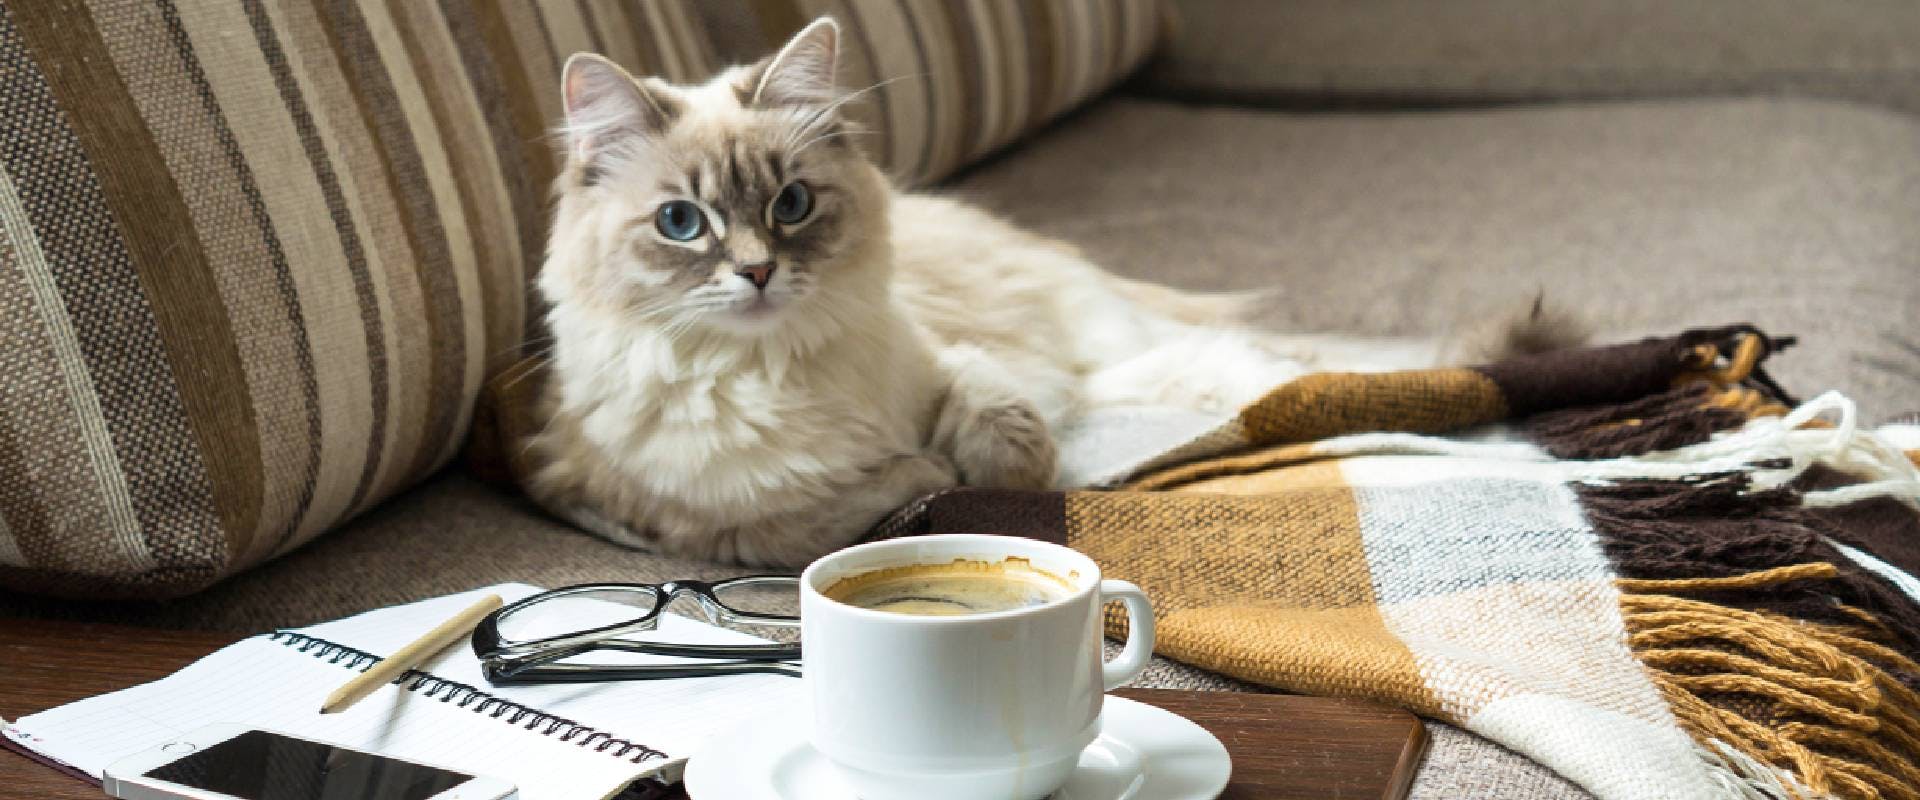 Cup of coffee in foreground with white cat on the sofa behind